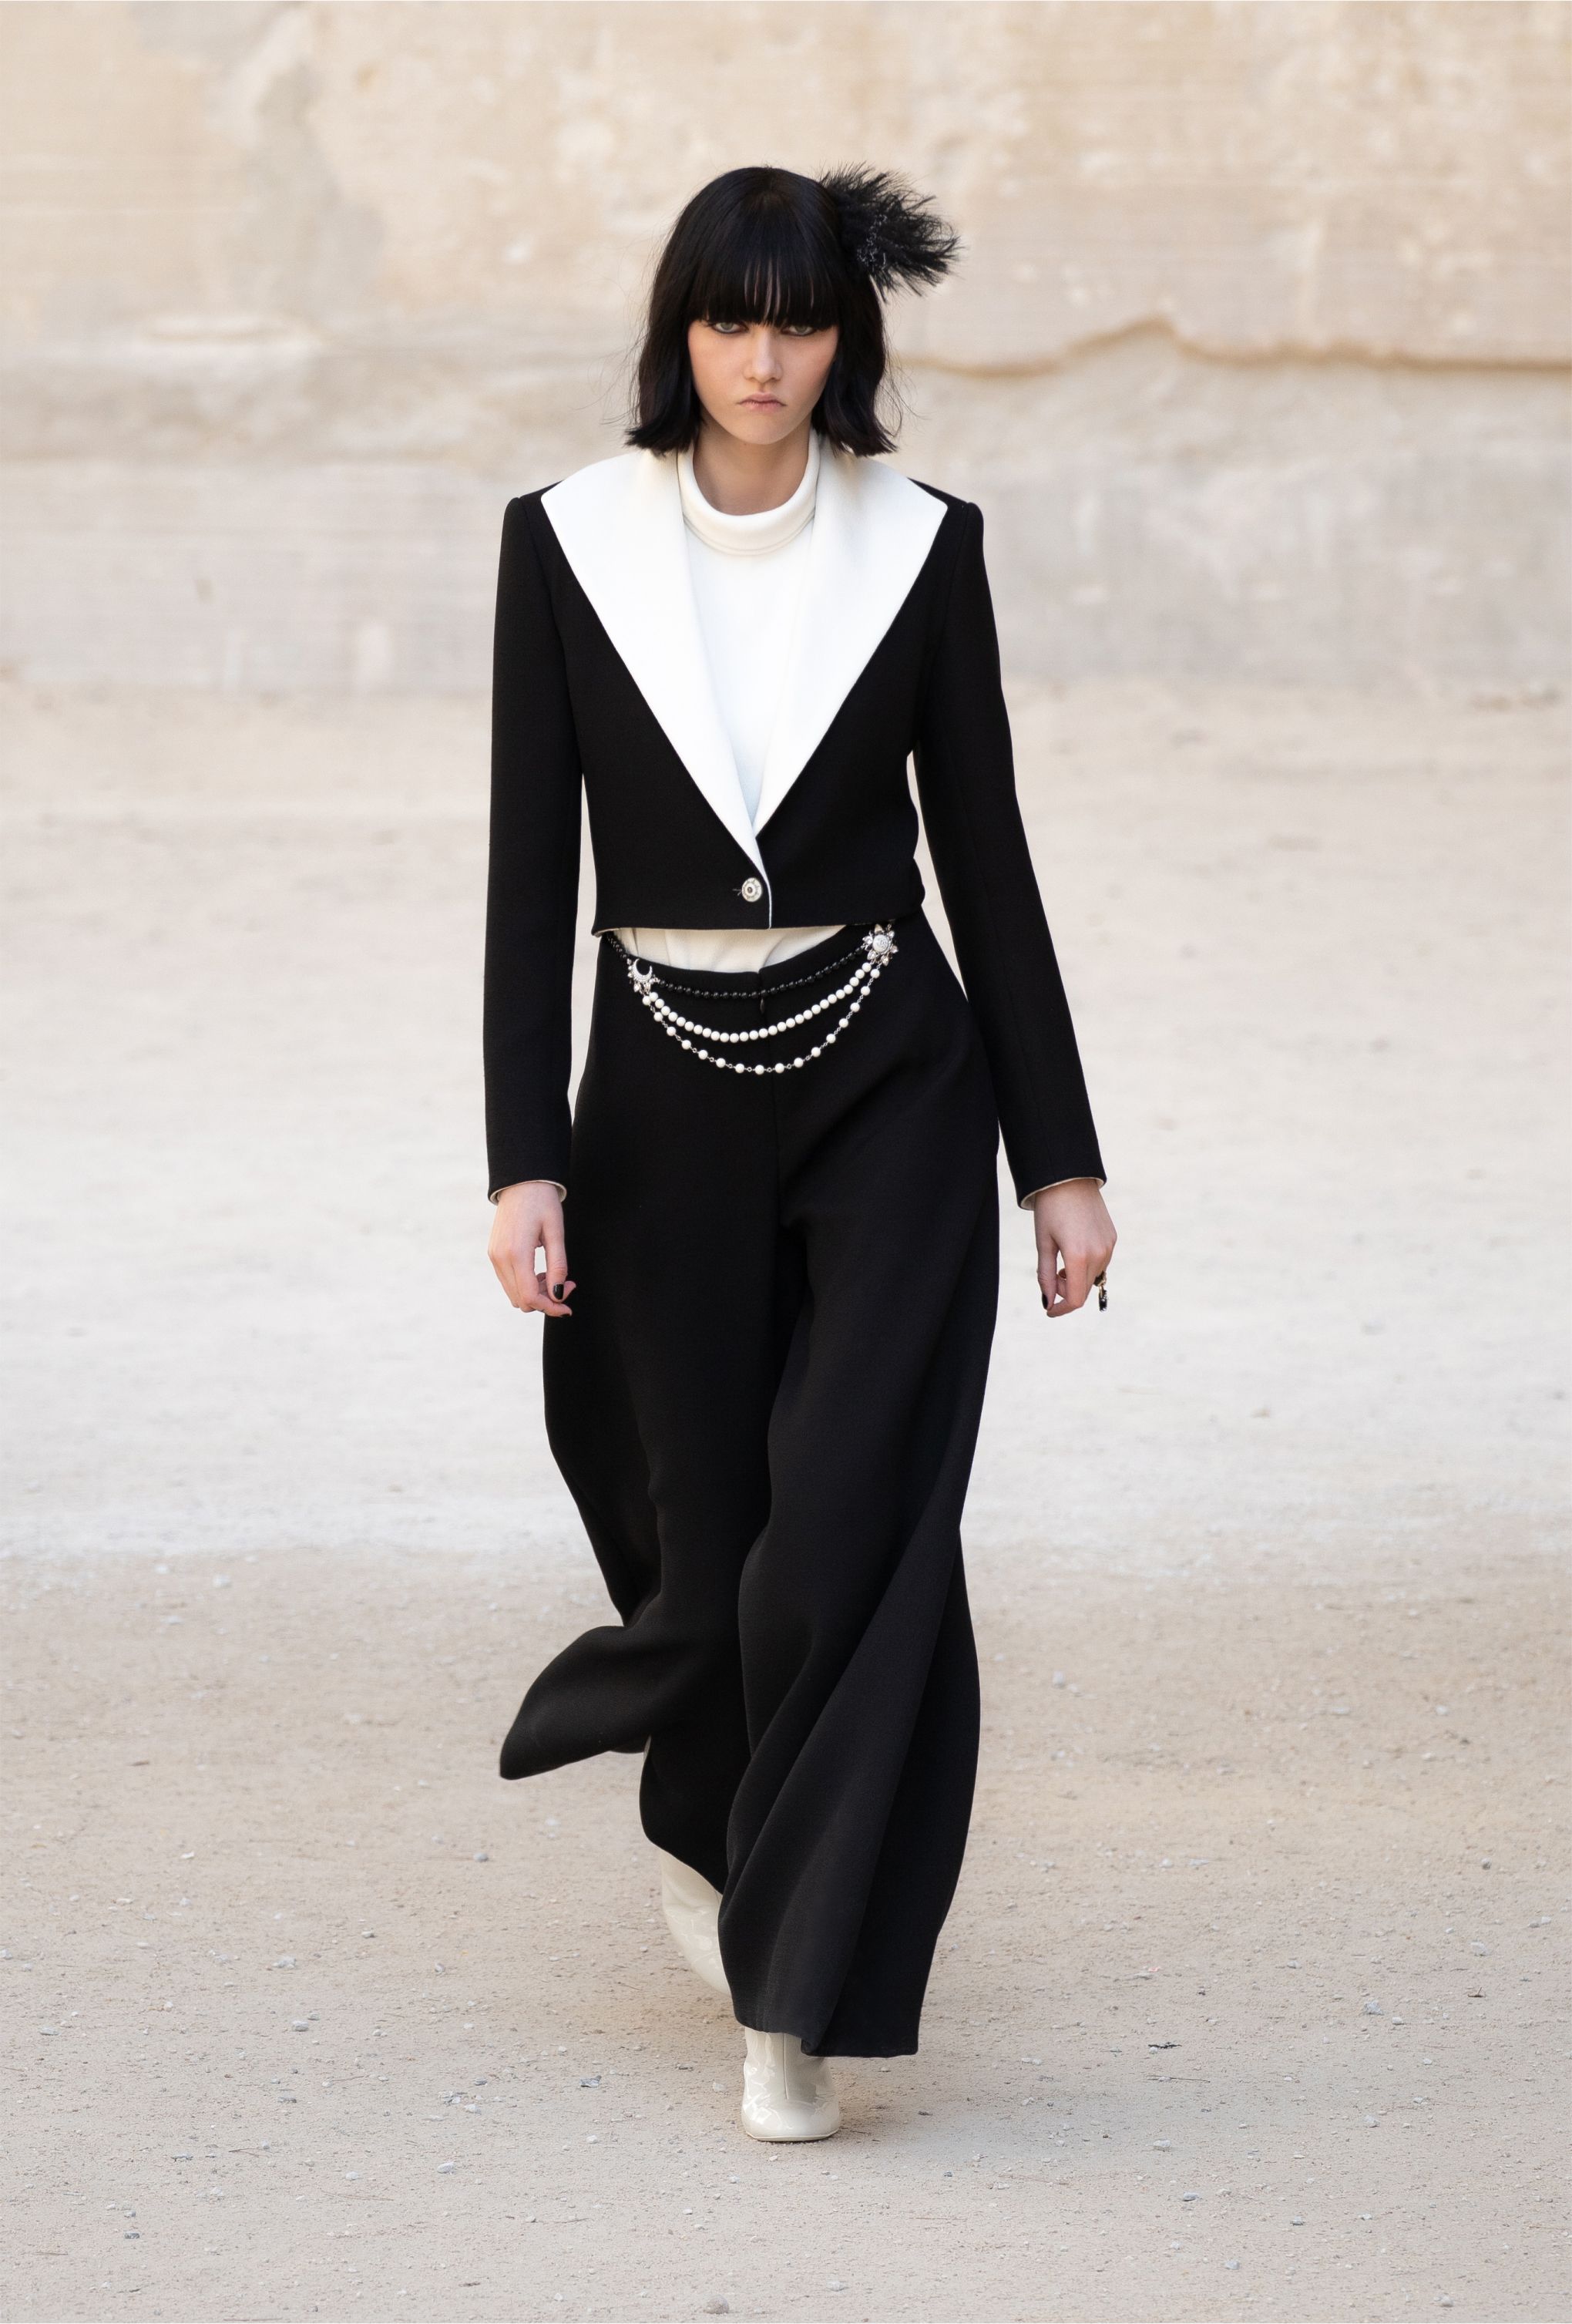 CHANEL Cruise 2021/22: Nothing better to capture and reflect the light, News, IC&CO